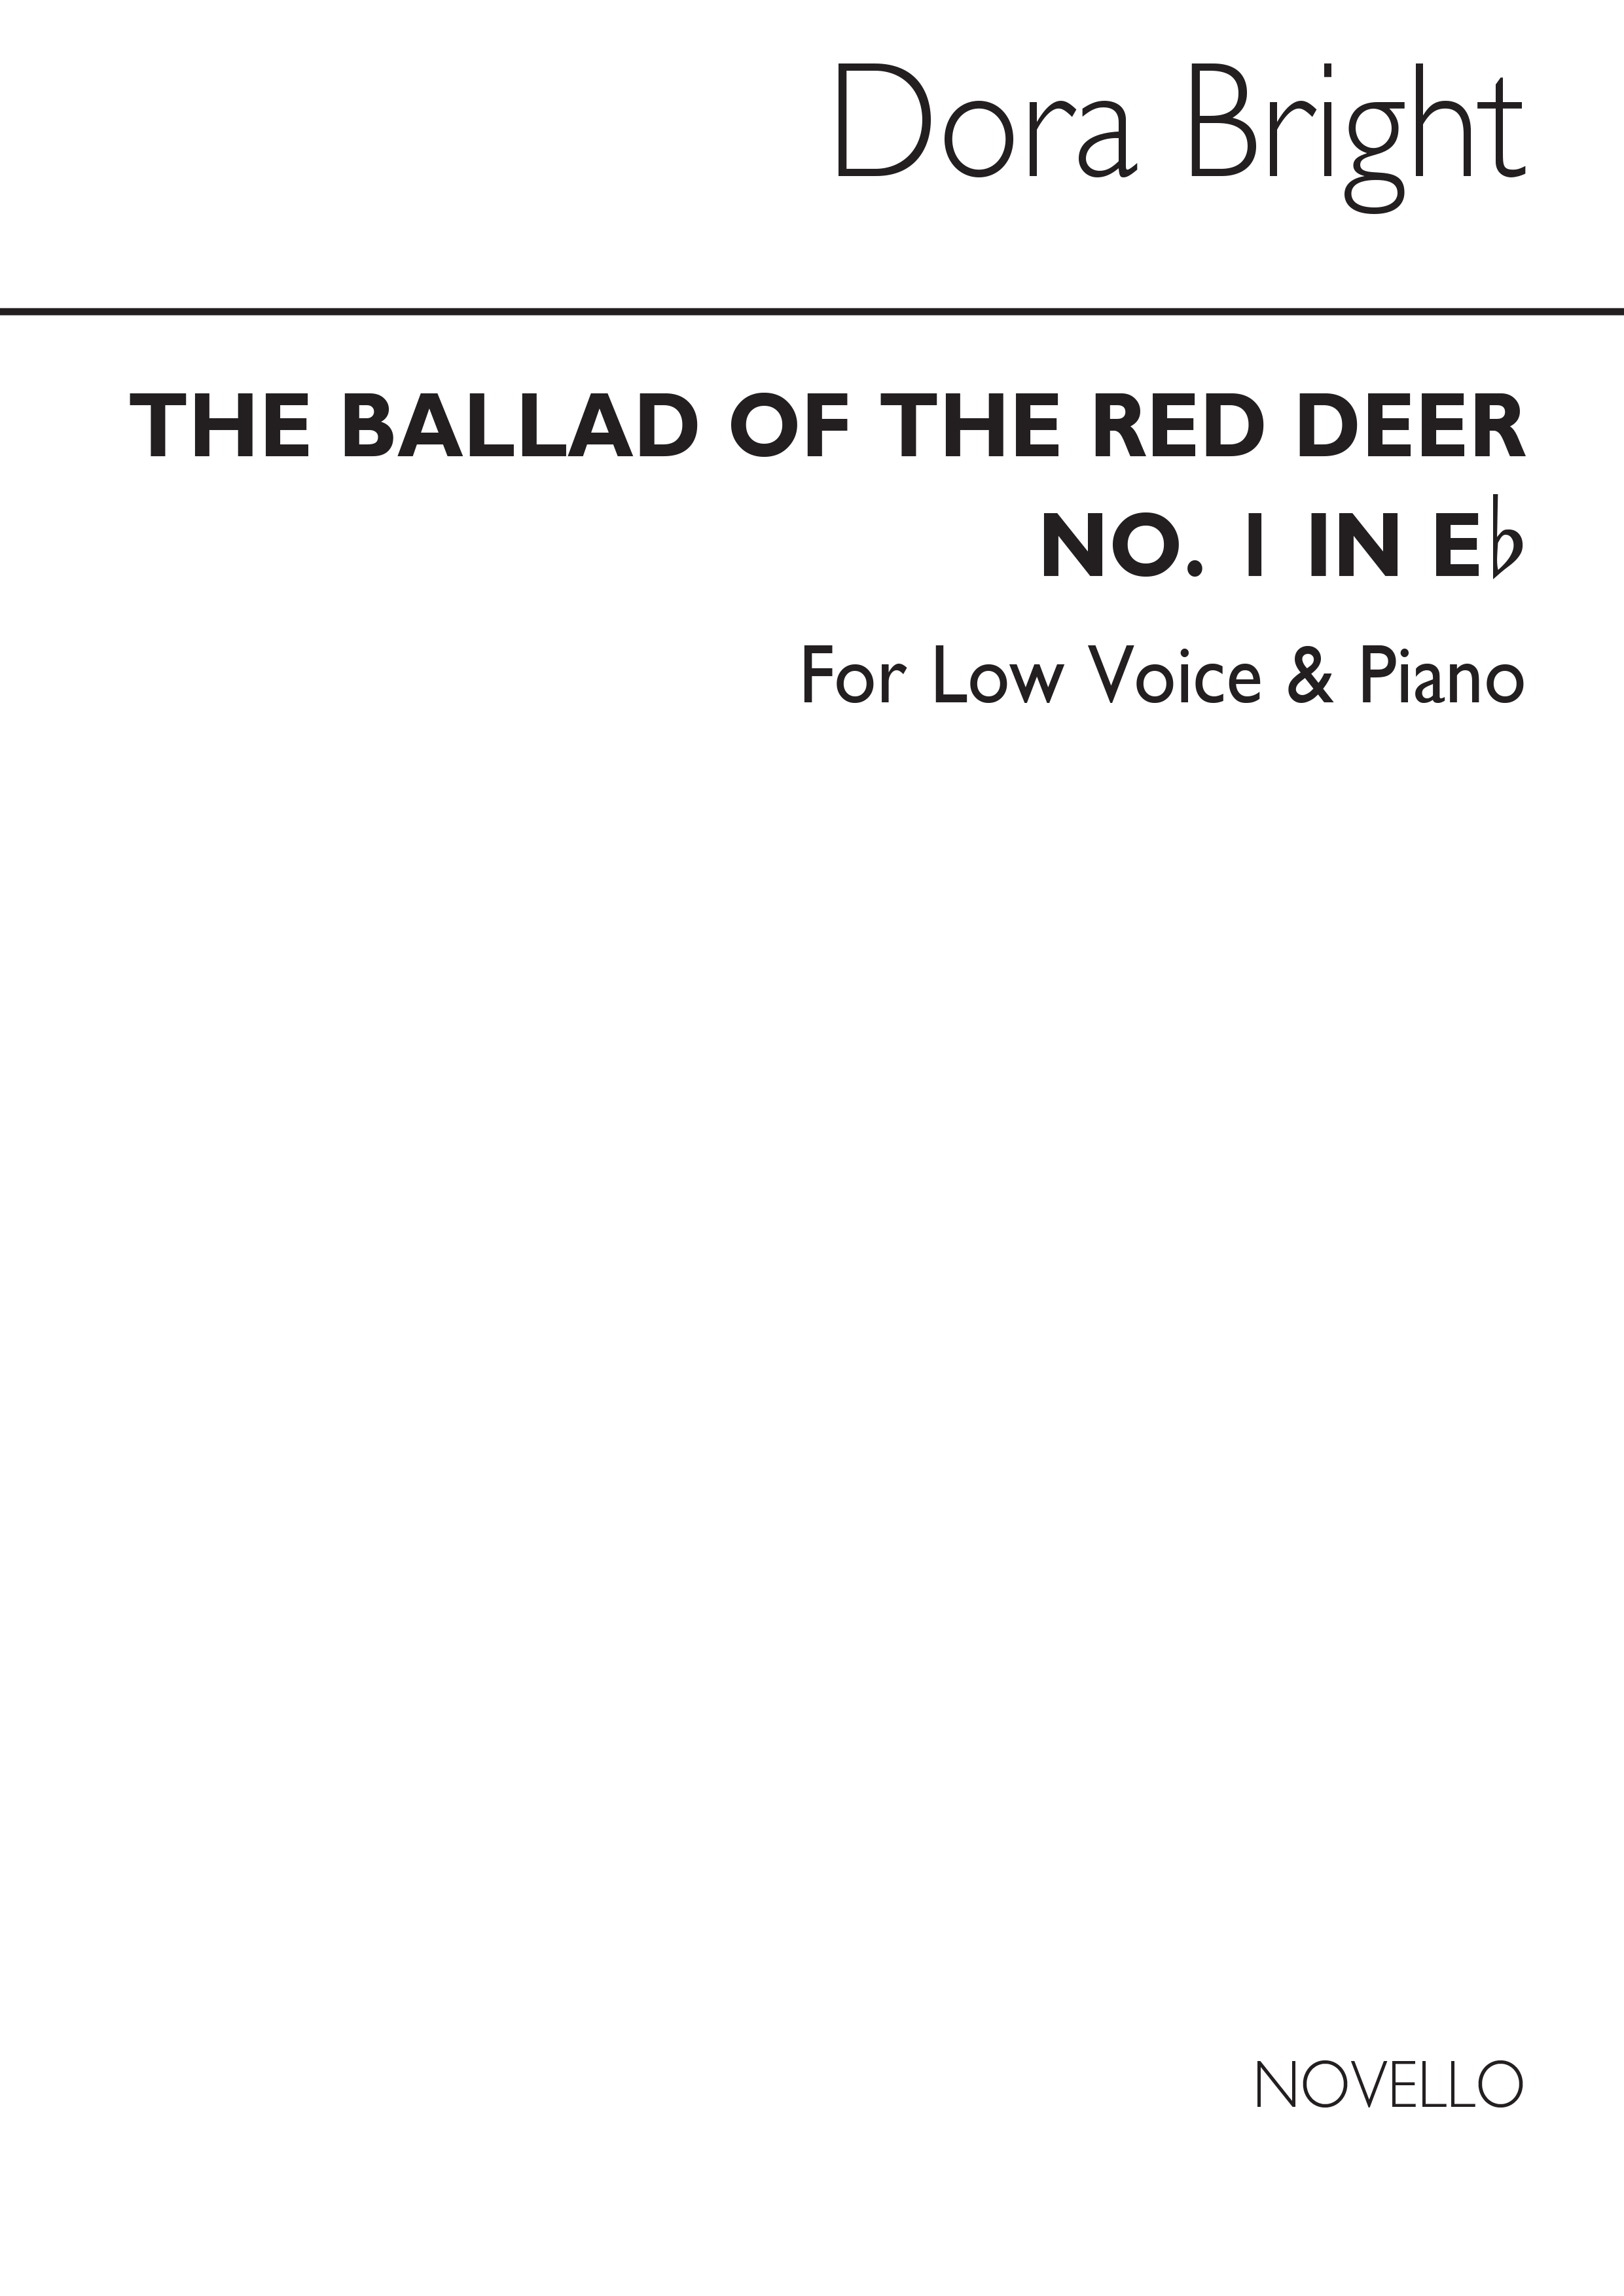 Ballad Of The Red Deer: Voice: Vocal Work